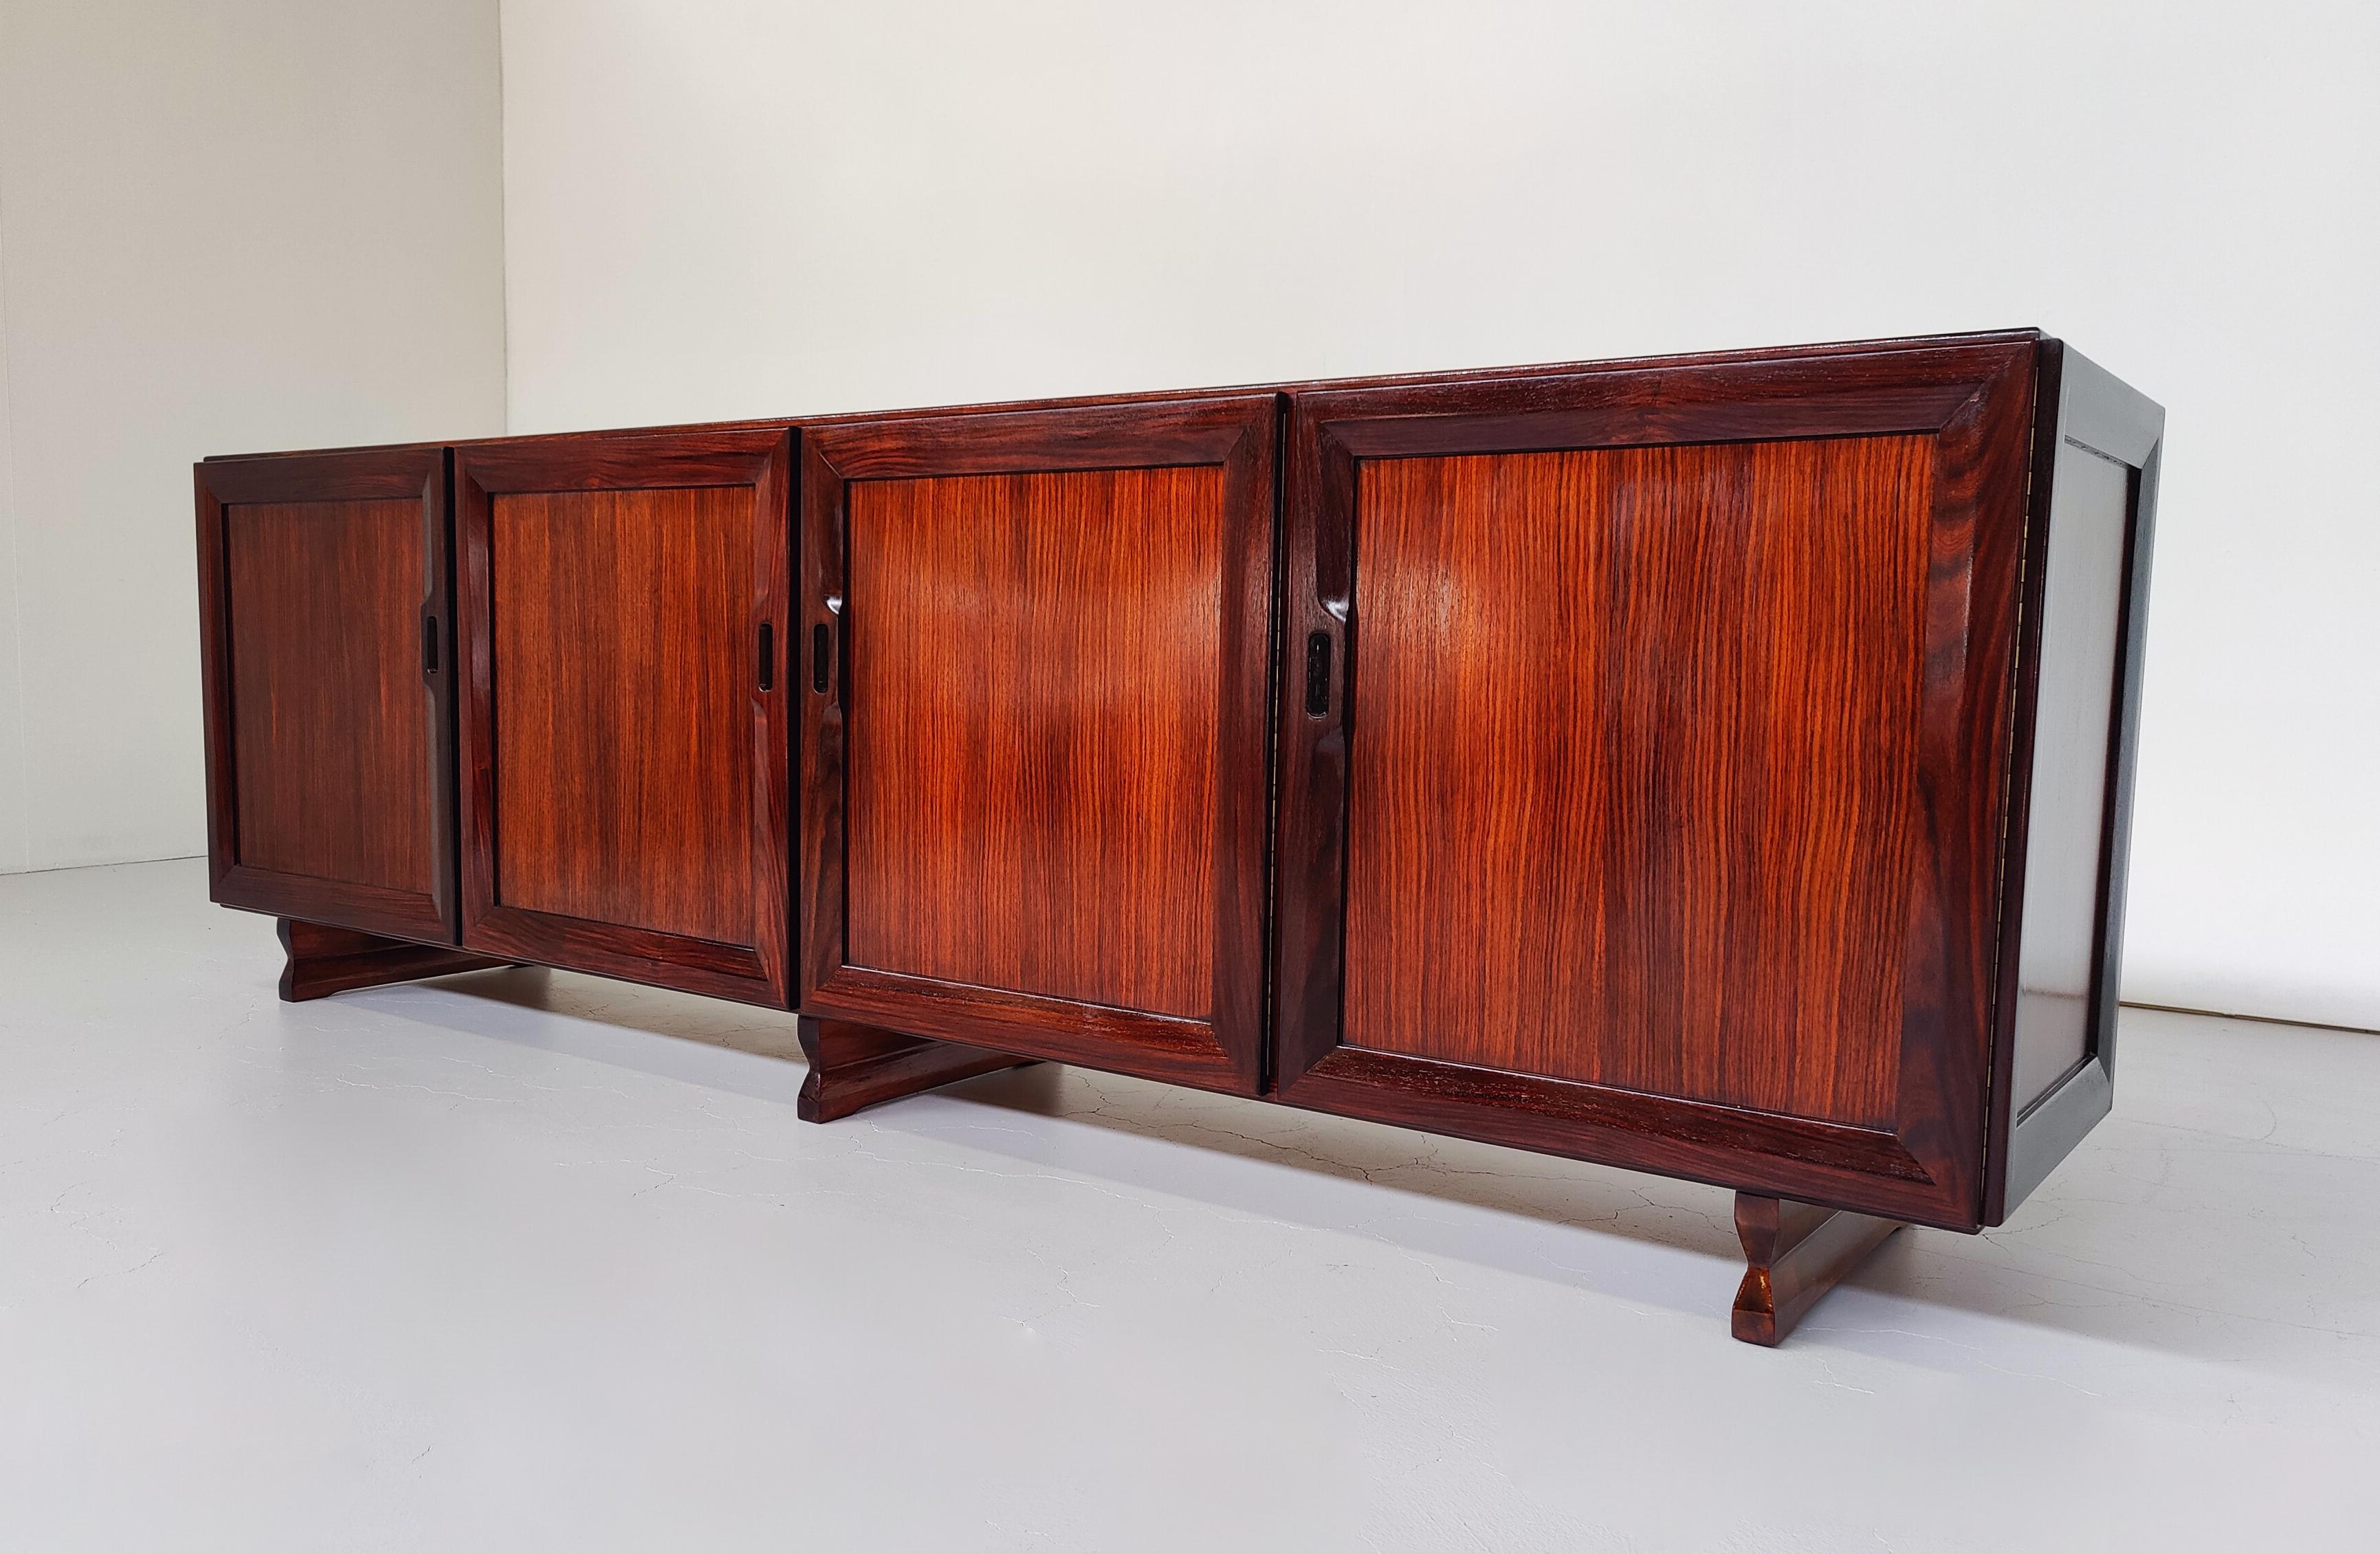 Wood Mid-Century Modern Sideboard MB15 by Fanco Albini for Poggi, Italy, 1950s For Sale